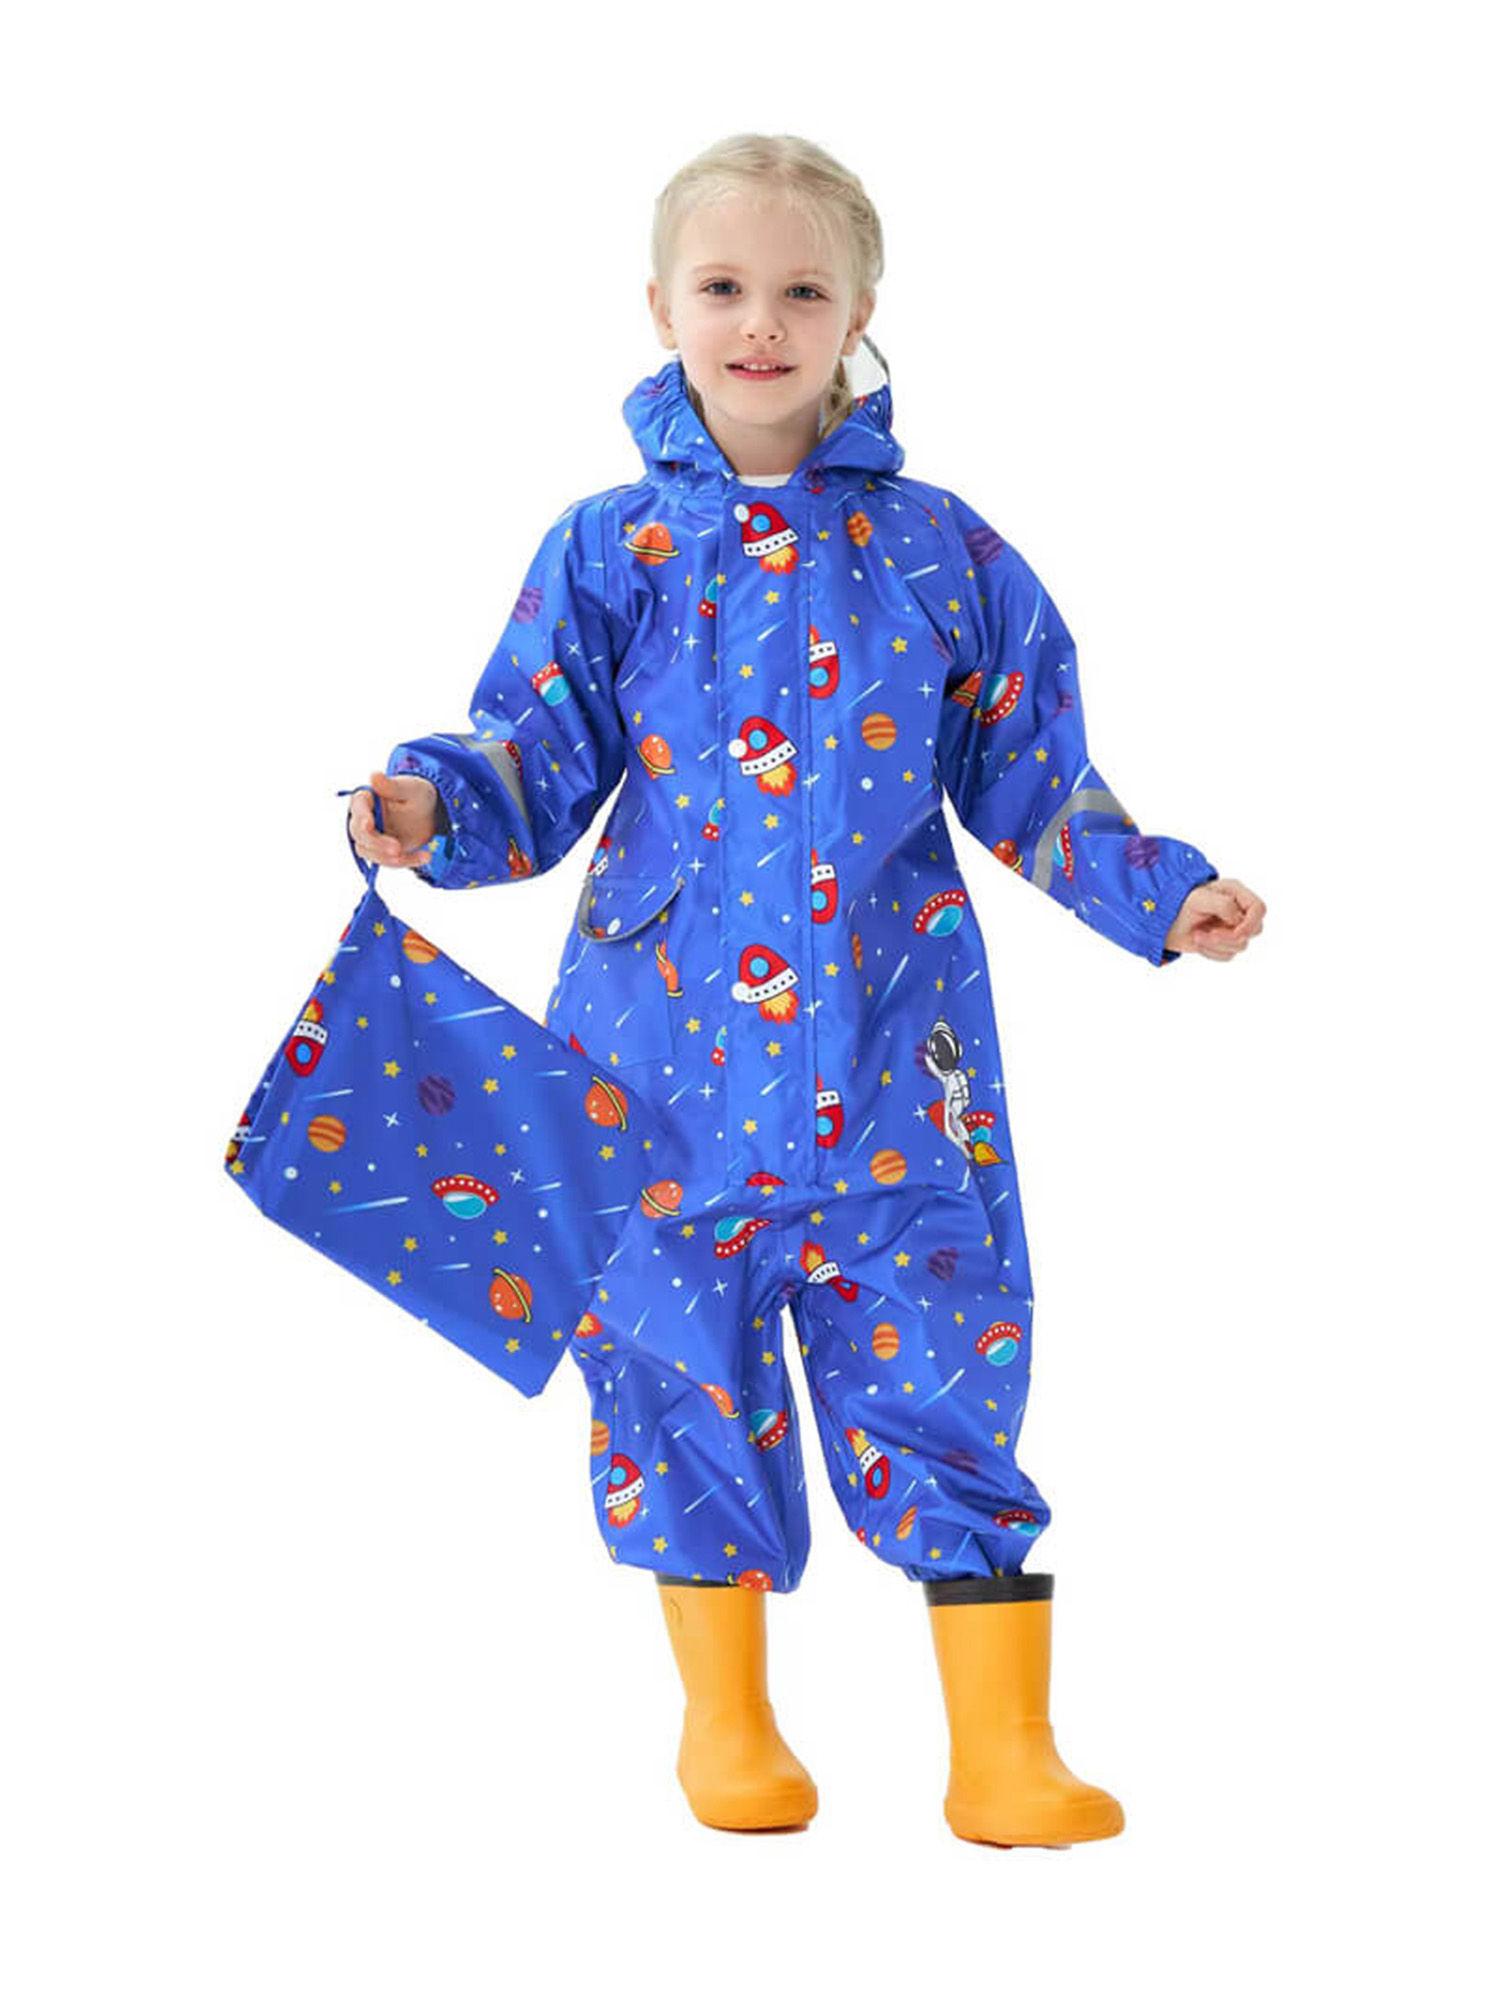 all over raincoat for kids - blue space theme